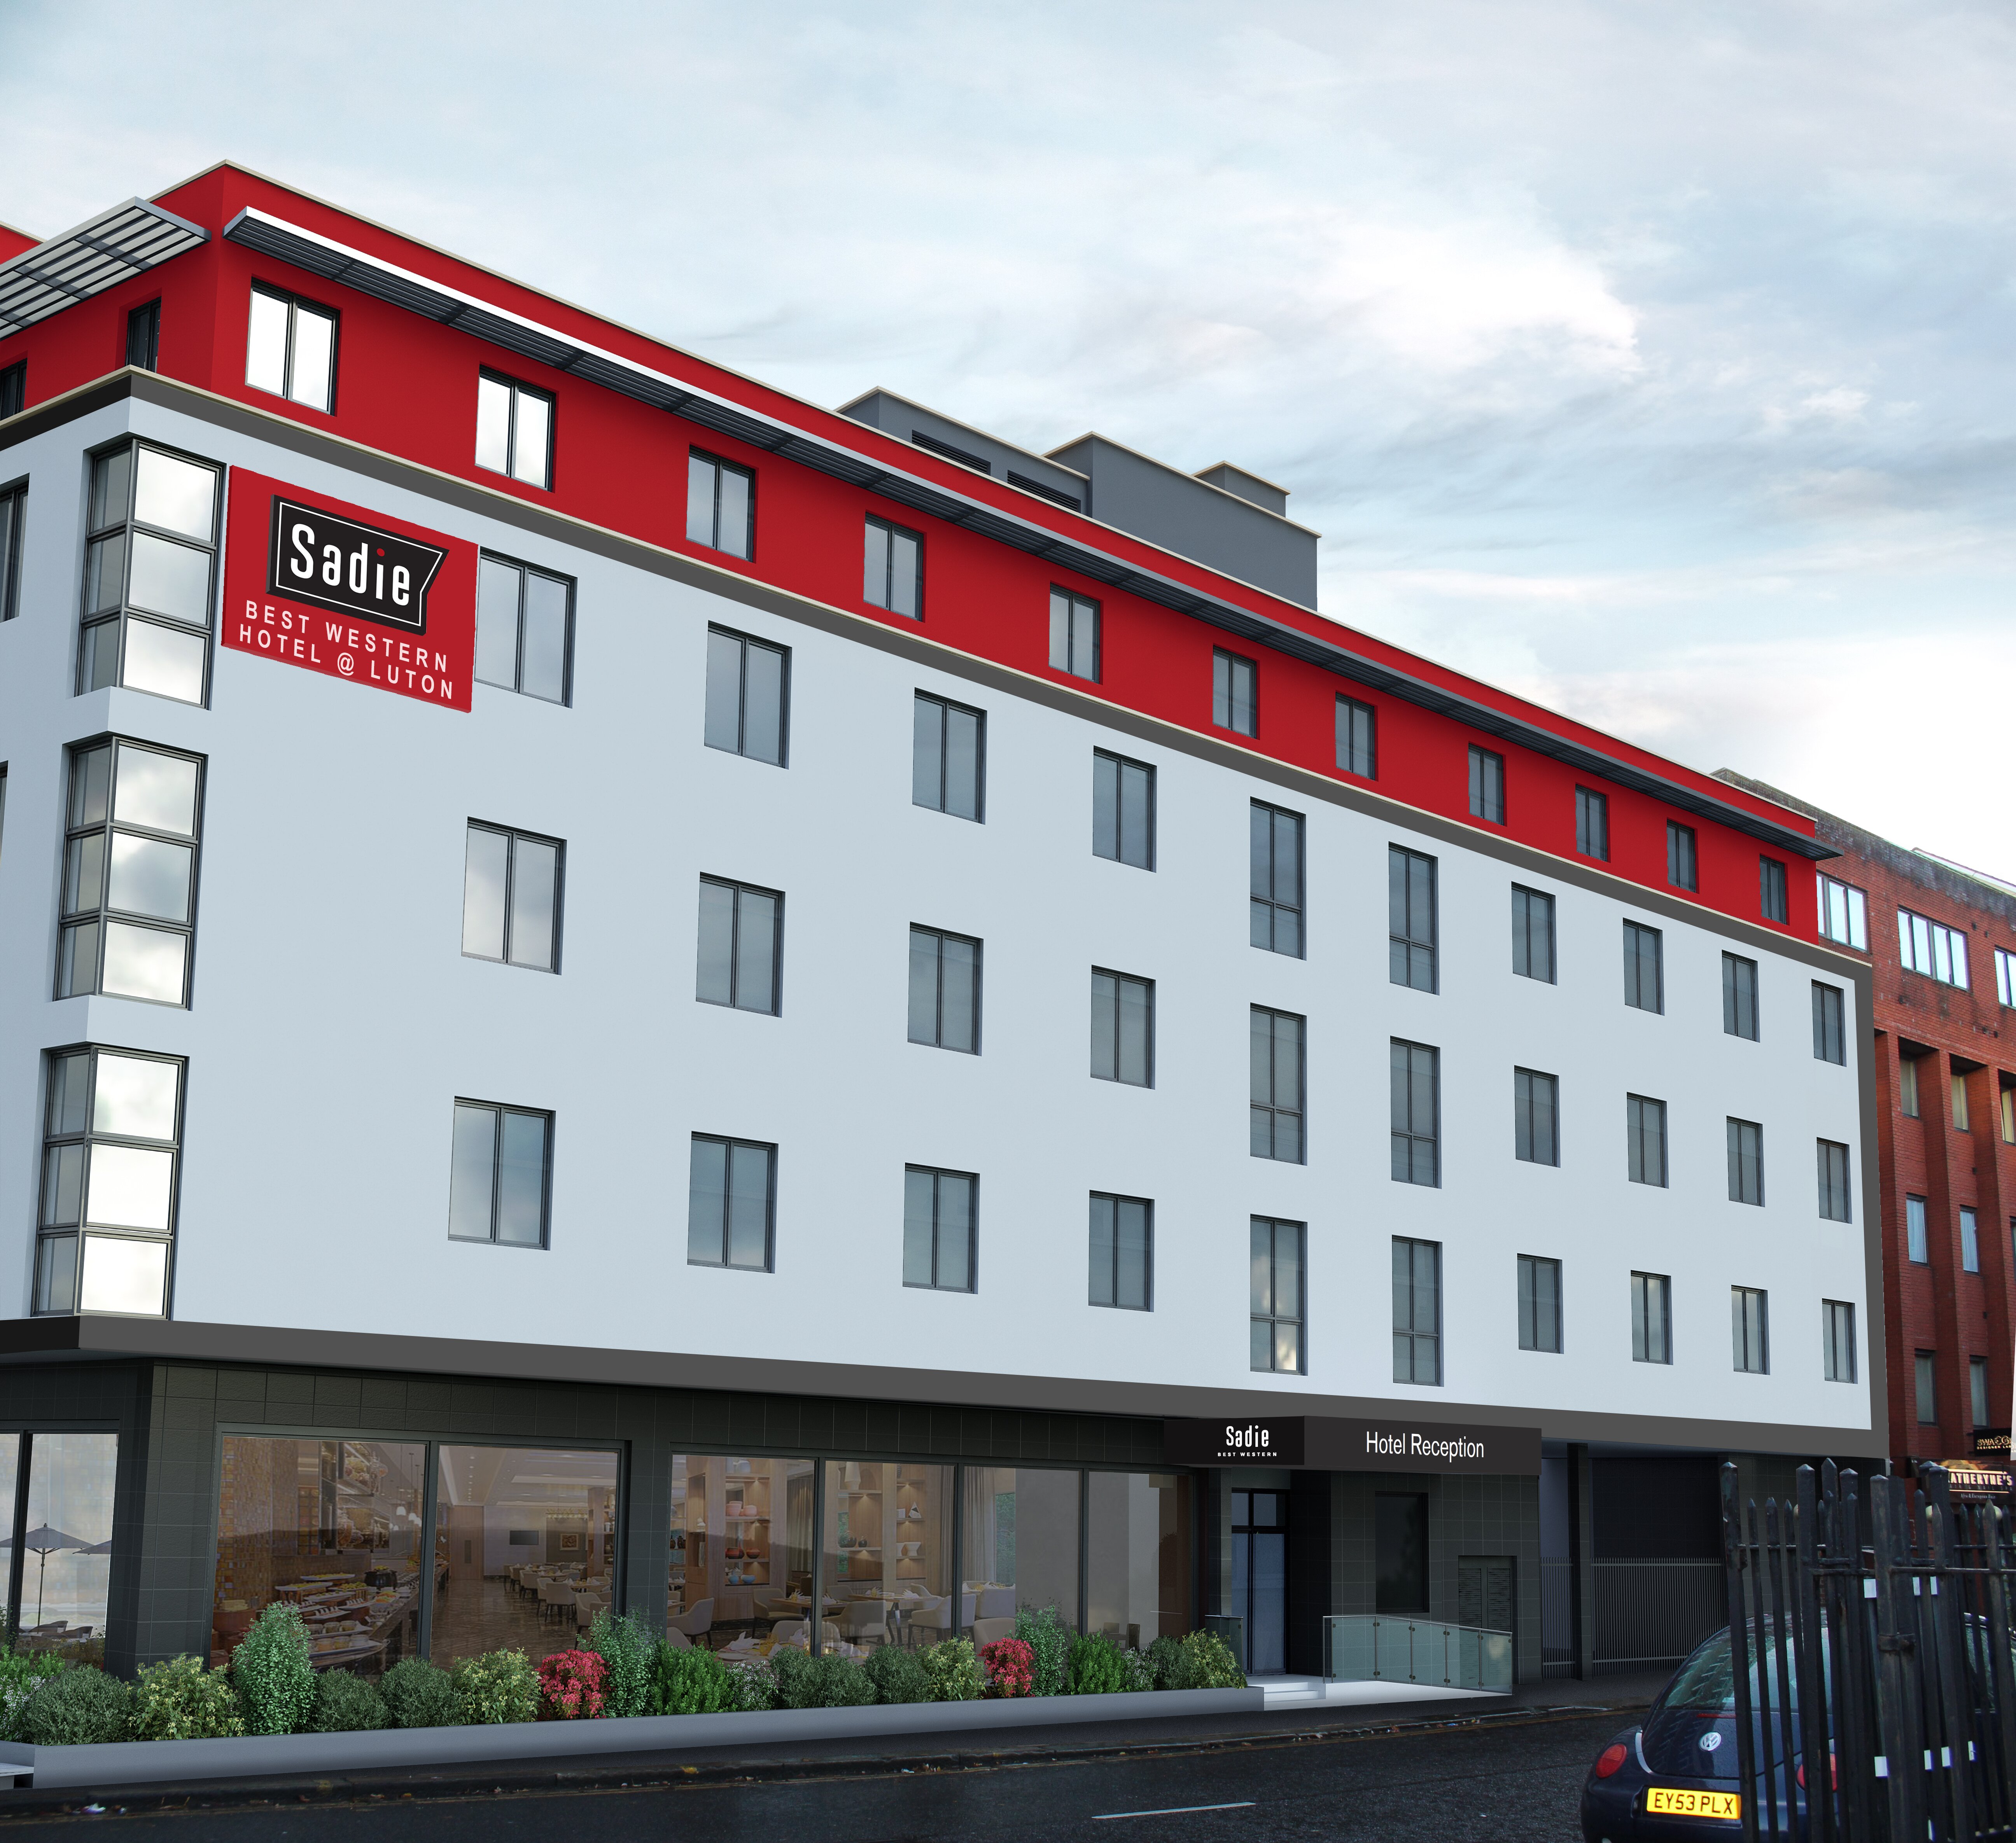 Luton launch for first Sadie hotel in Europe from Best Western 